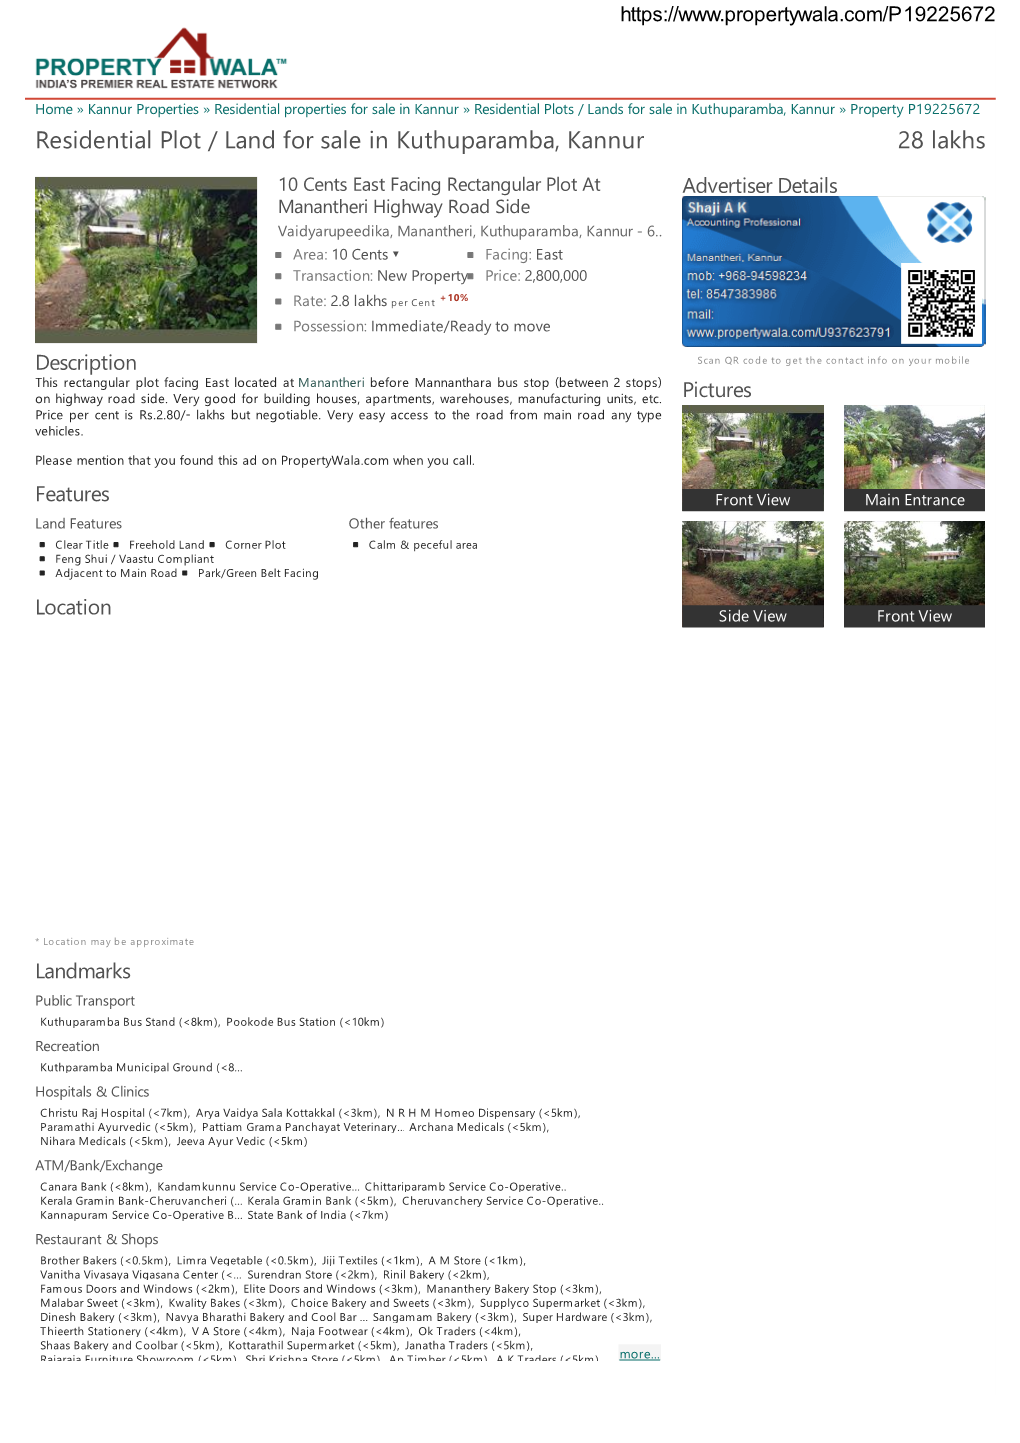 Residential Plot / Land for Sale in Kuthuparamba, Kannur